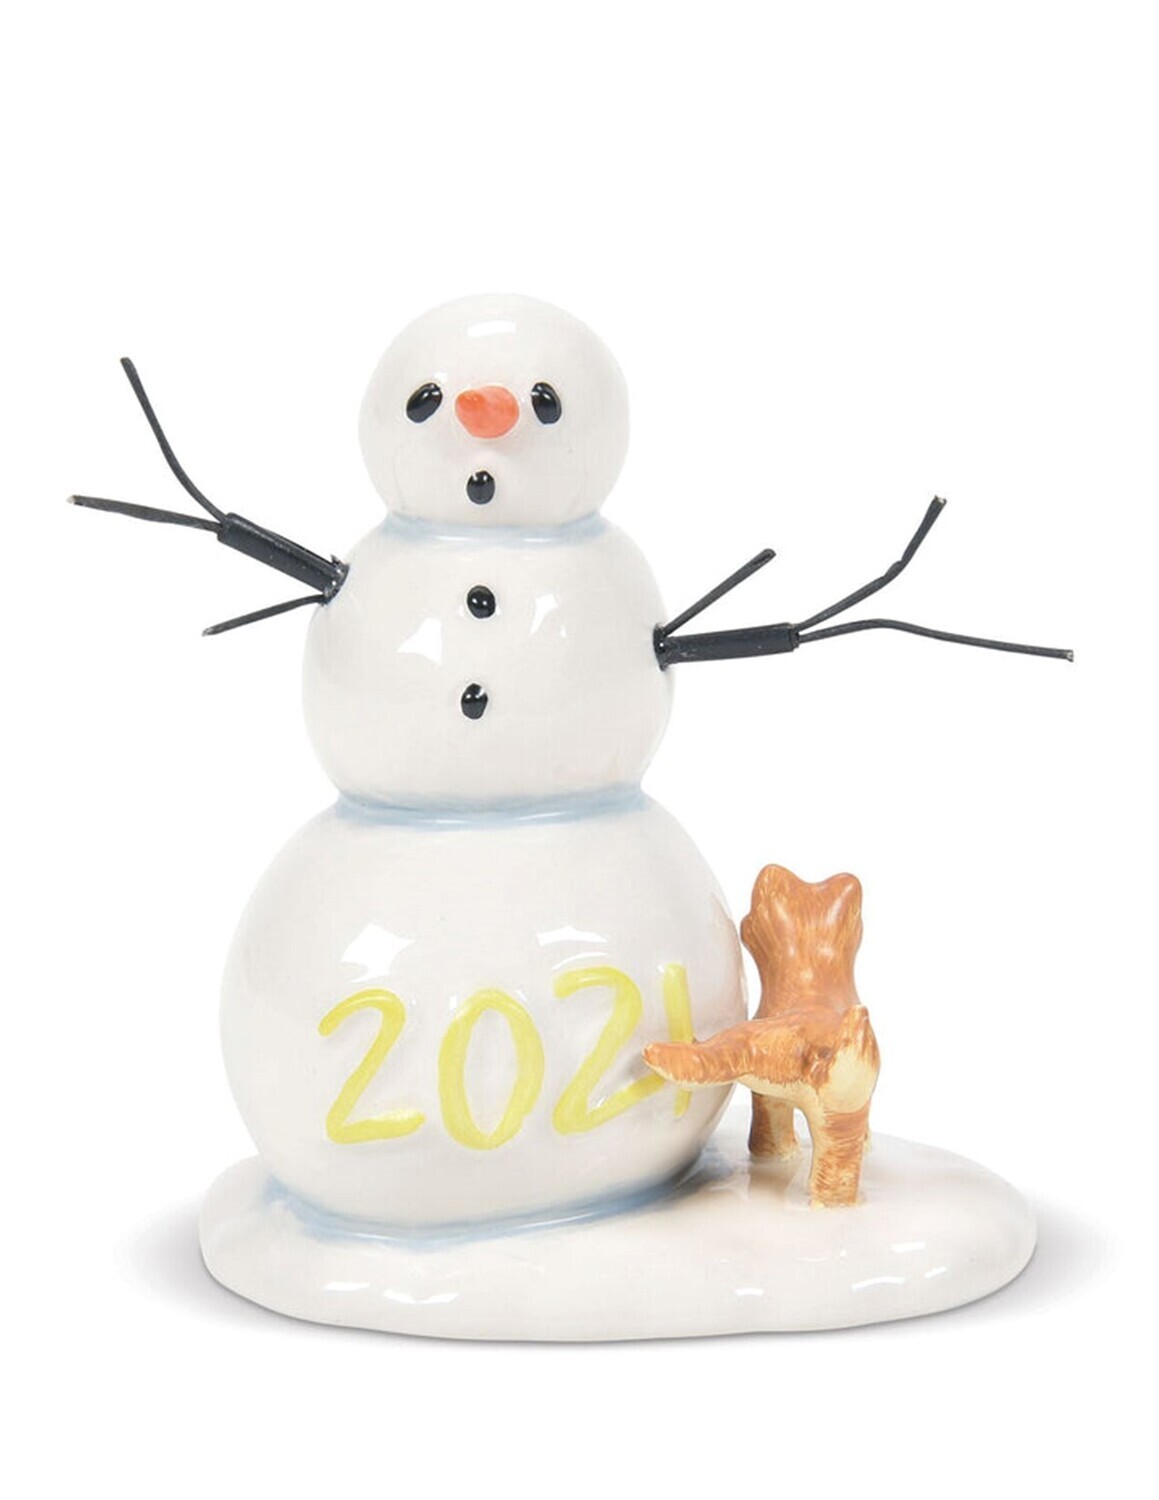 Department 56 Annual Village Accessory "Lucky the Snowman 2021" (6007653)